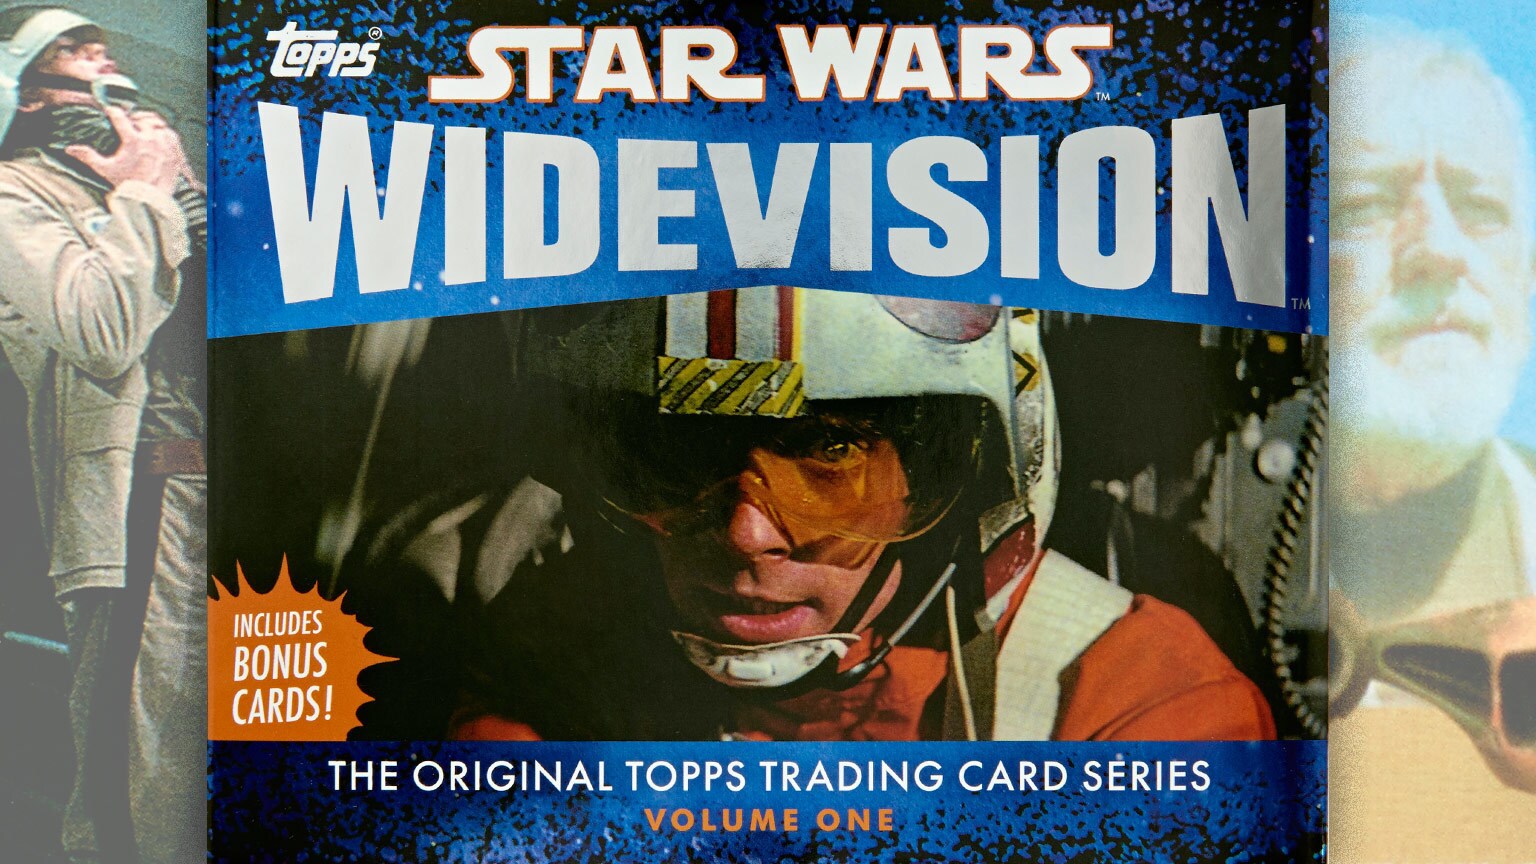 The Saga's '90s Trading Cards Return in the Beautiful Star Wars Widevision